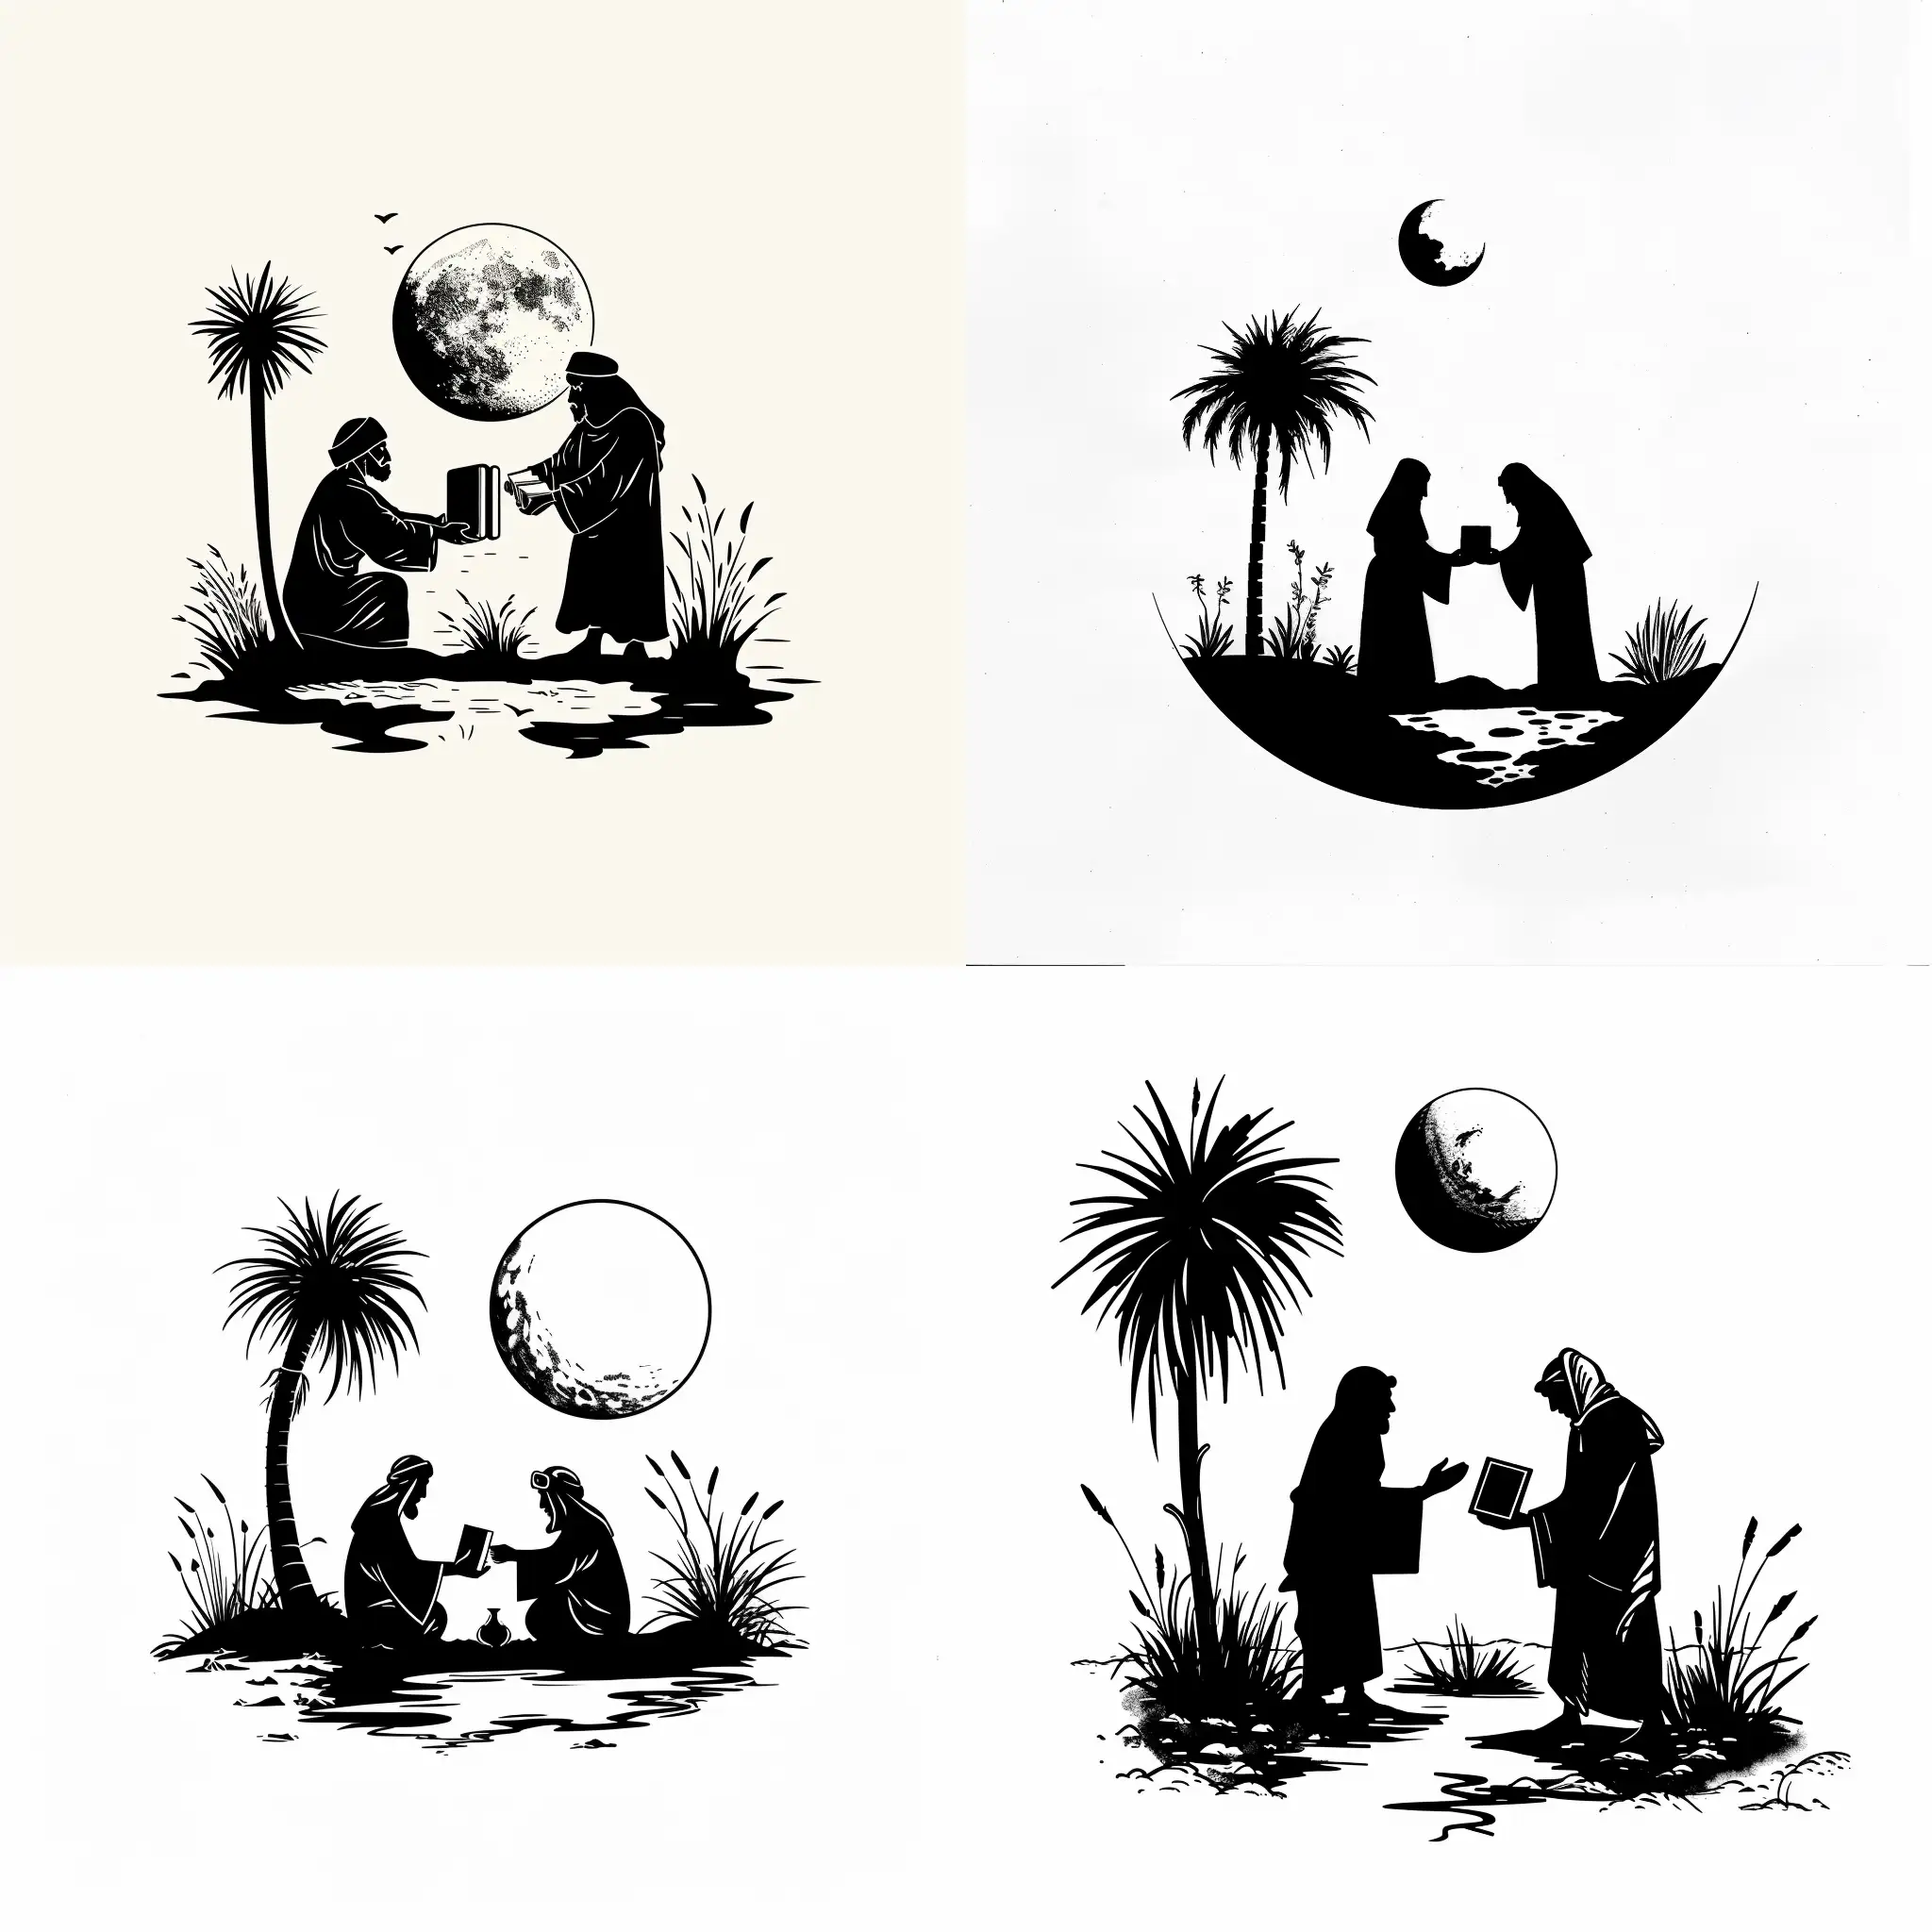 draw a simple logo of two Bedouins exchanging books in a oasis with one palm tree, some little grass, an ink lake near and a big moon behind

make the two men, the palm tree and the ground black

make the background full white and only color the moon
